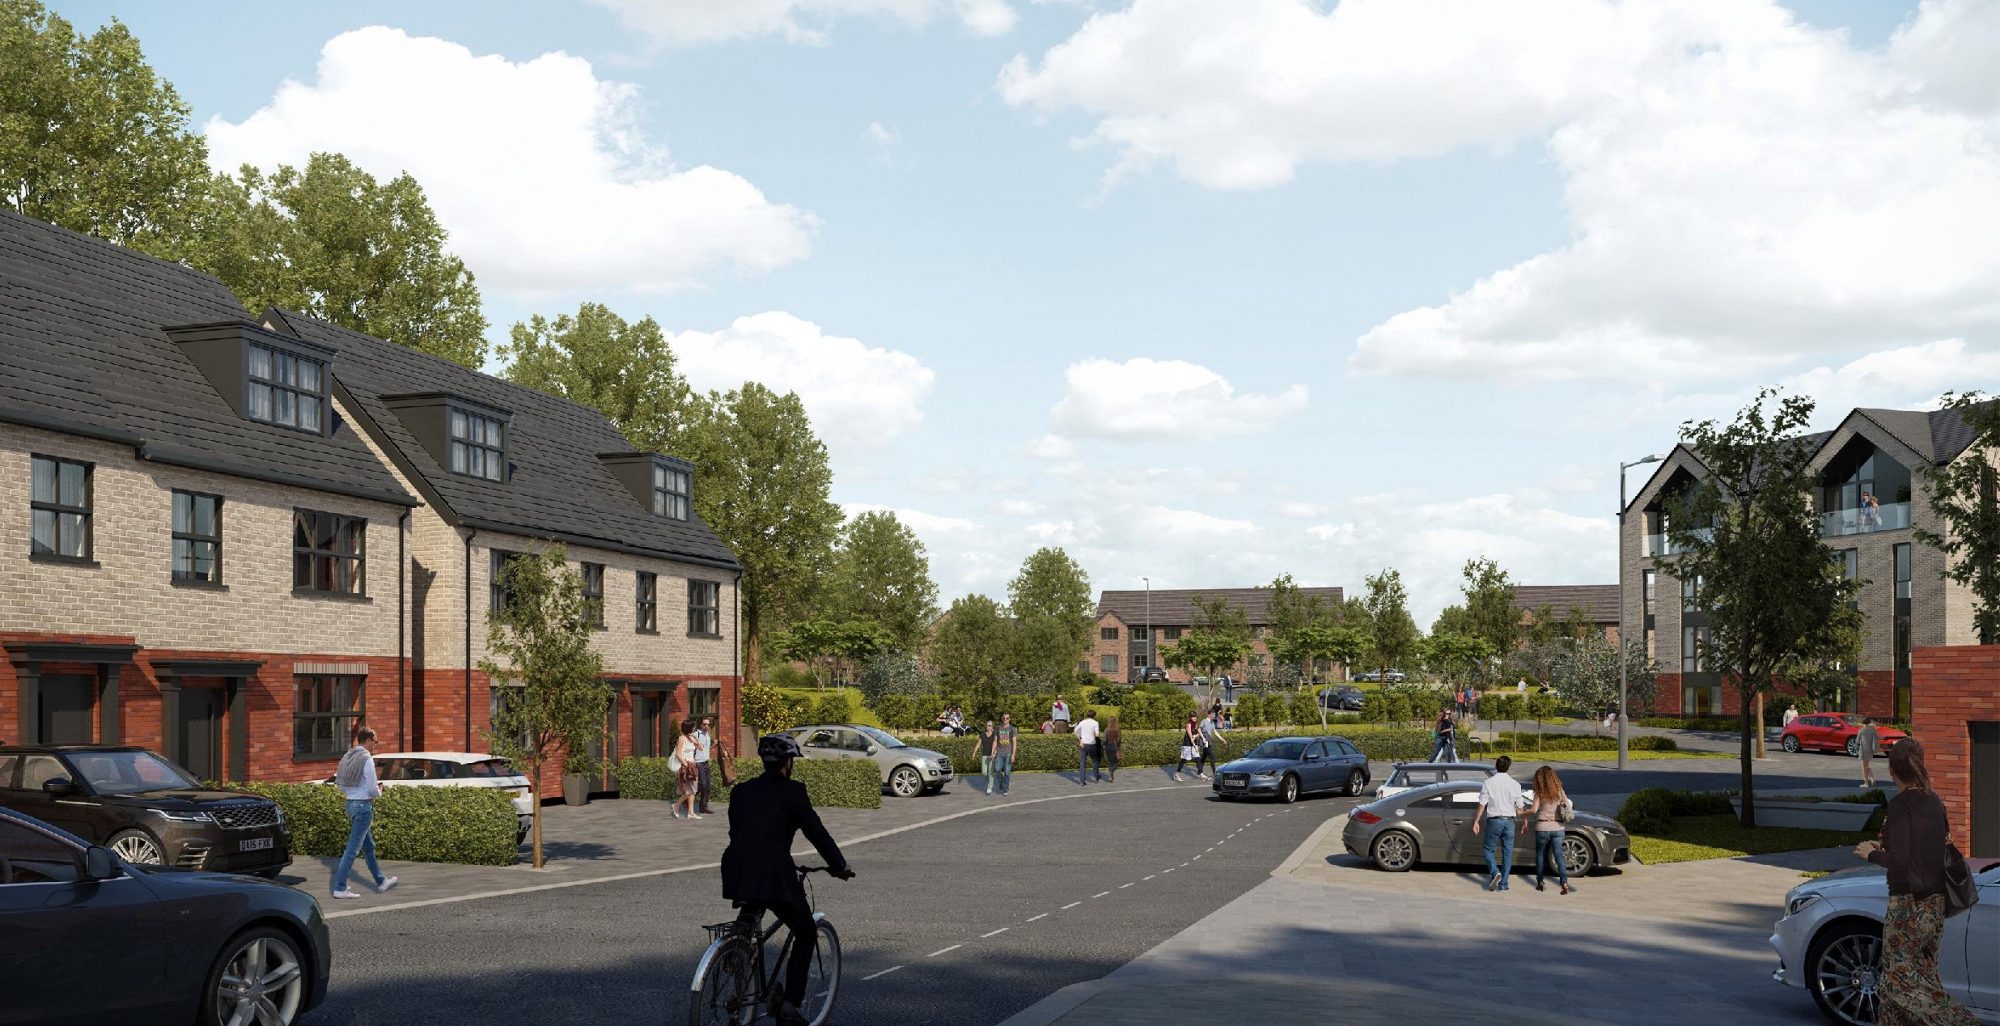 £80m Bedford residential scheme gets the go-ahead